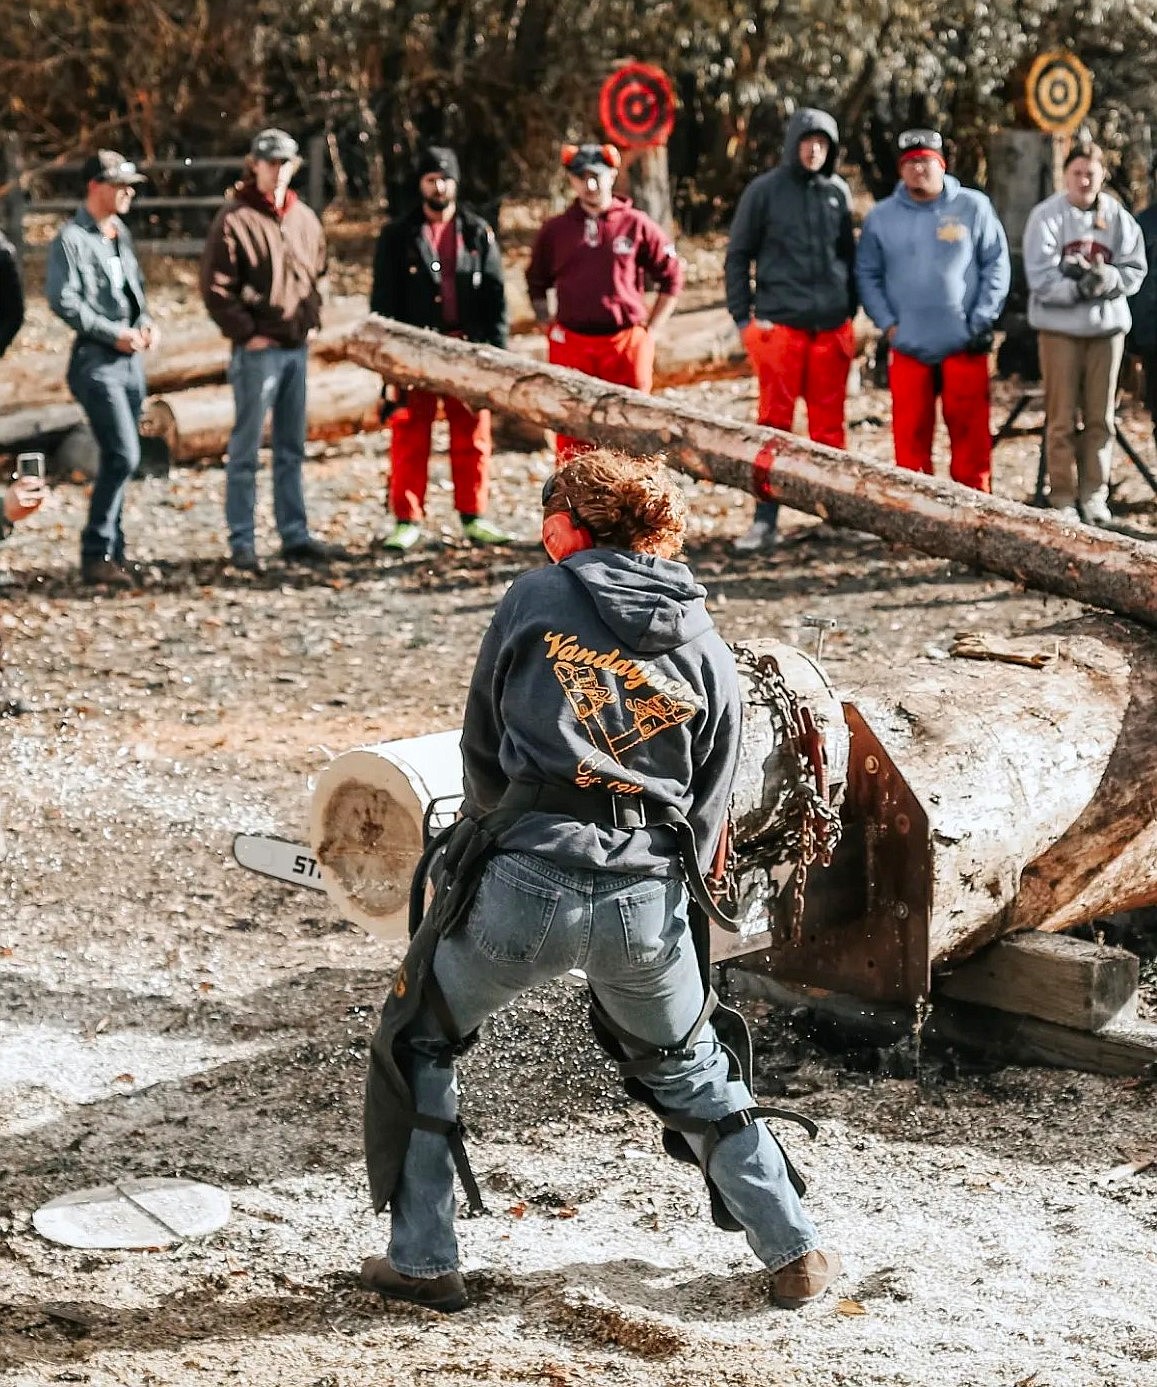 Eika Willis competes in the stock cut event at the University of Idaho logging games contest on Nov. 11-12. she took first in the event.